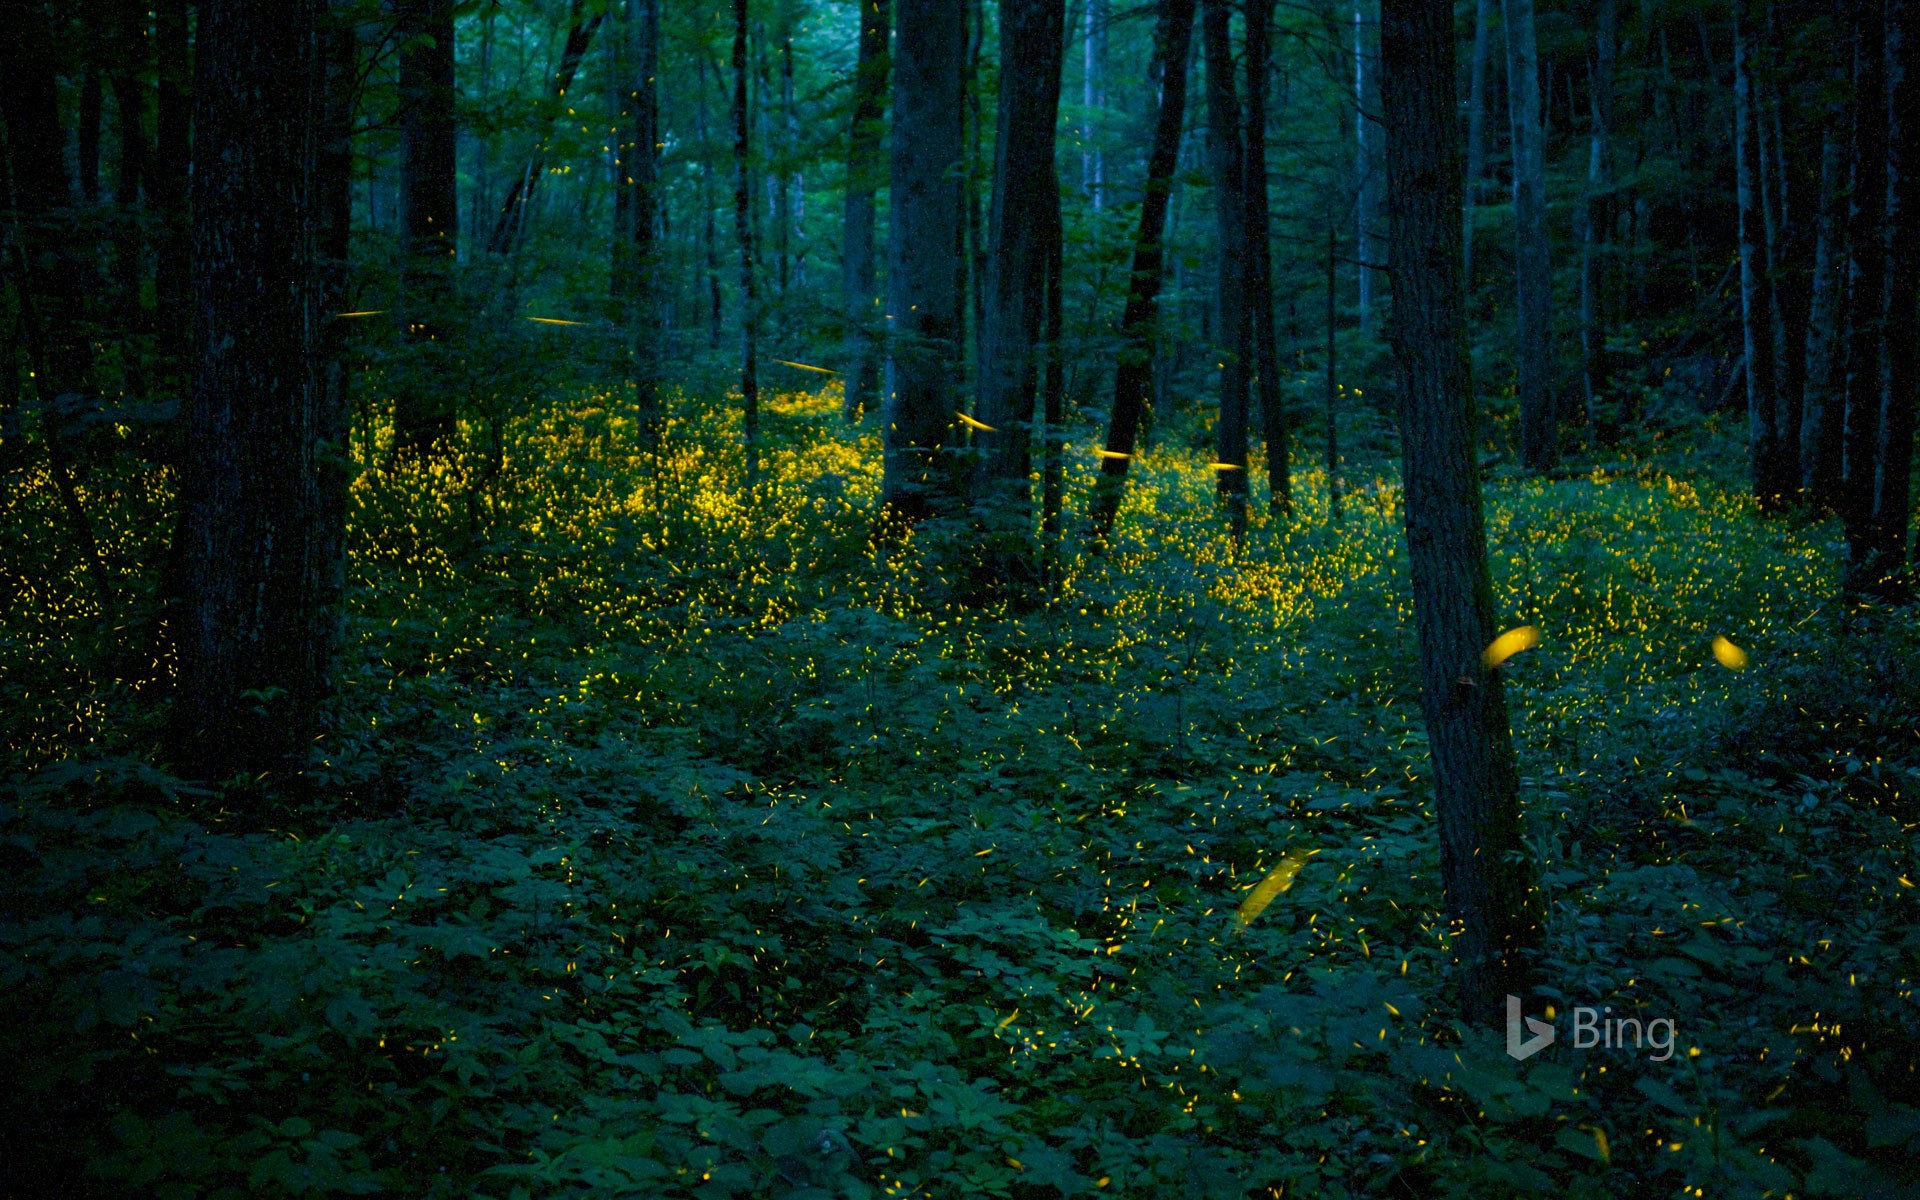 Synchronous fireflies illuminate the forests of Great Smoky Mountains National Park, Tennessee